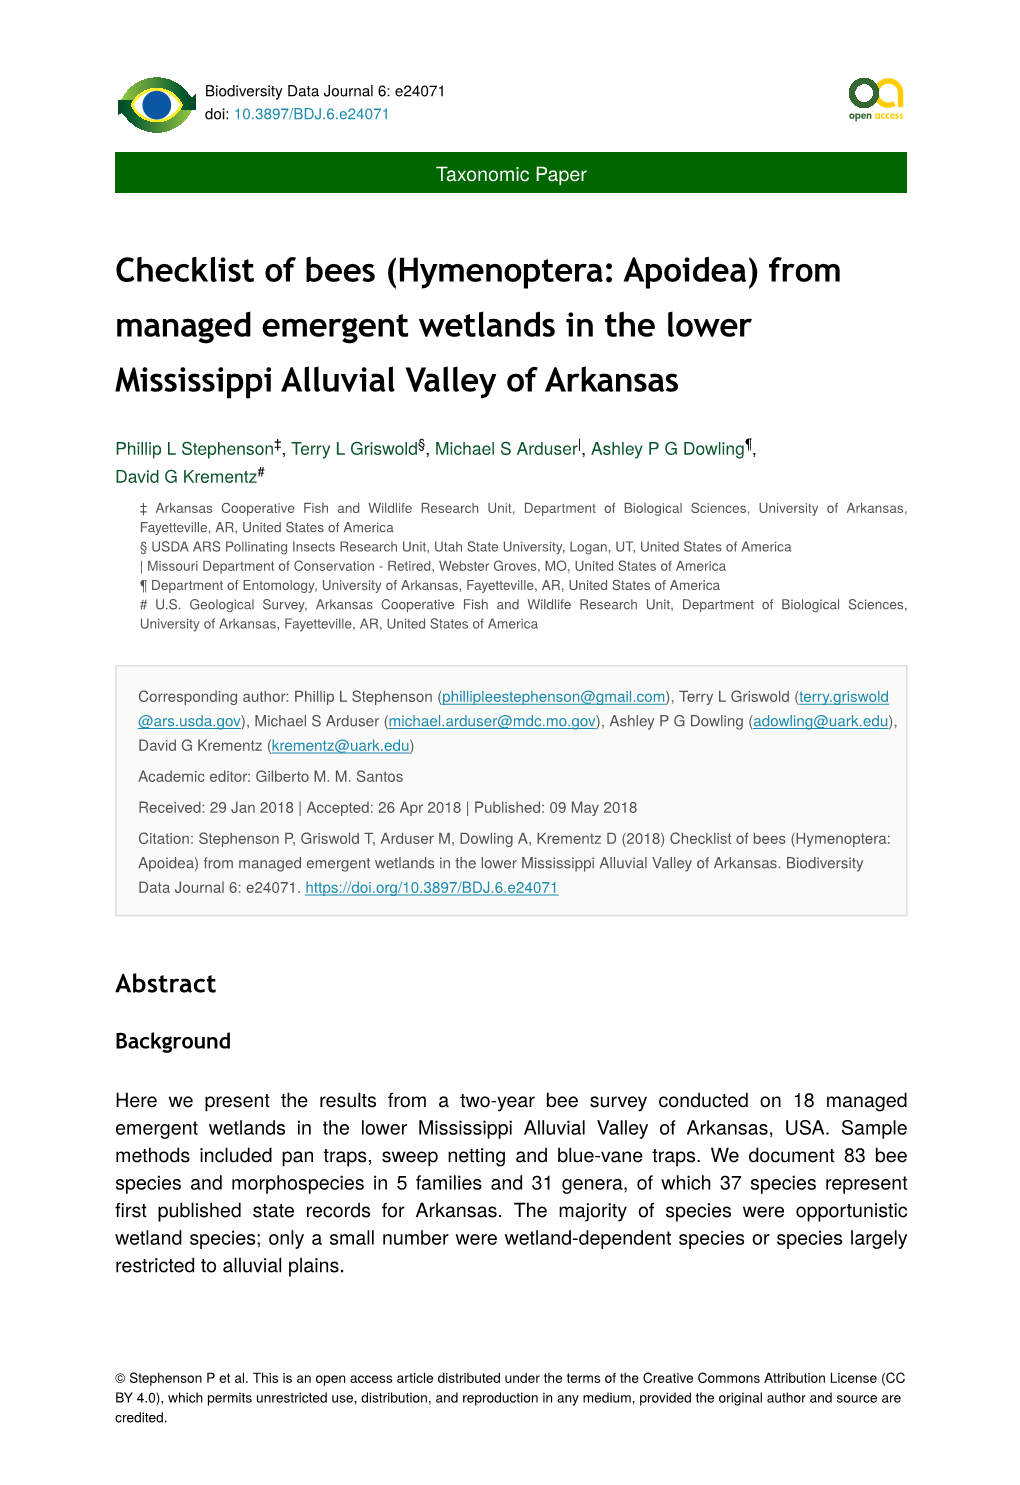 Hymenoptera: Apoidea) from Managed Emergent Wetlands in the Lower Mississippi Alluvial Valley of Arkansas